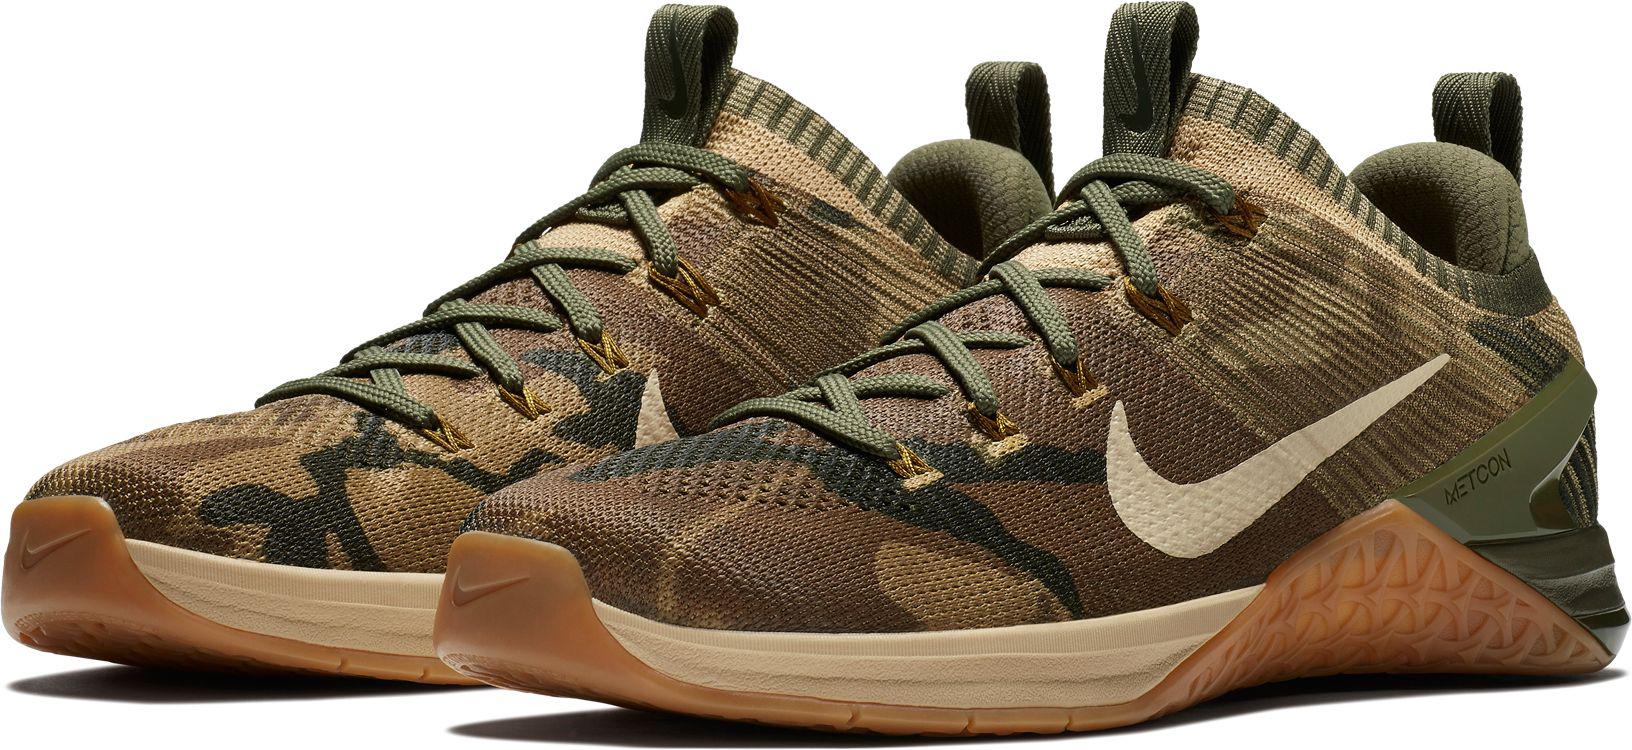 Nike Metcon Dsx Flyknit 2 Camo Training Shoes in Green for